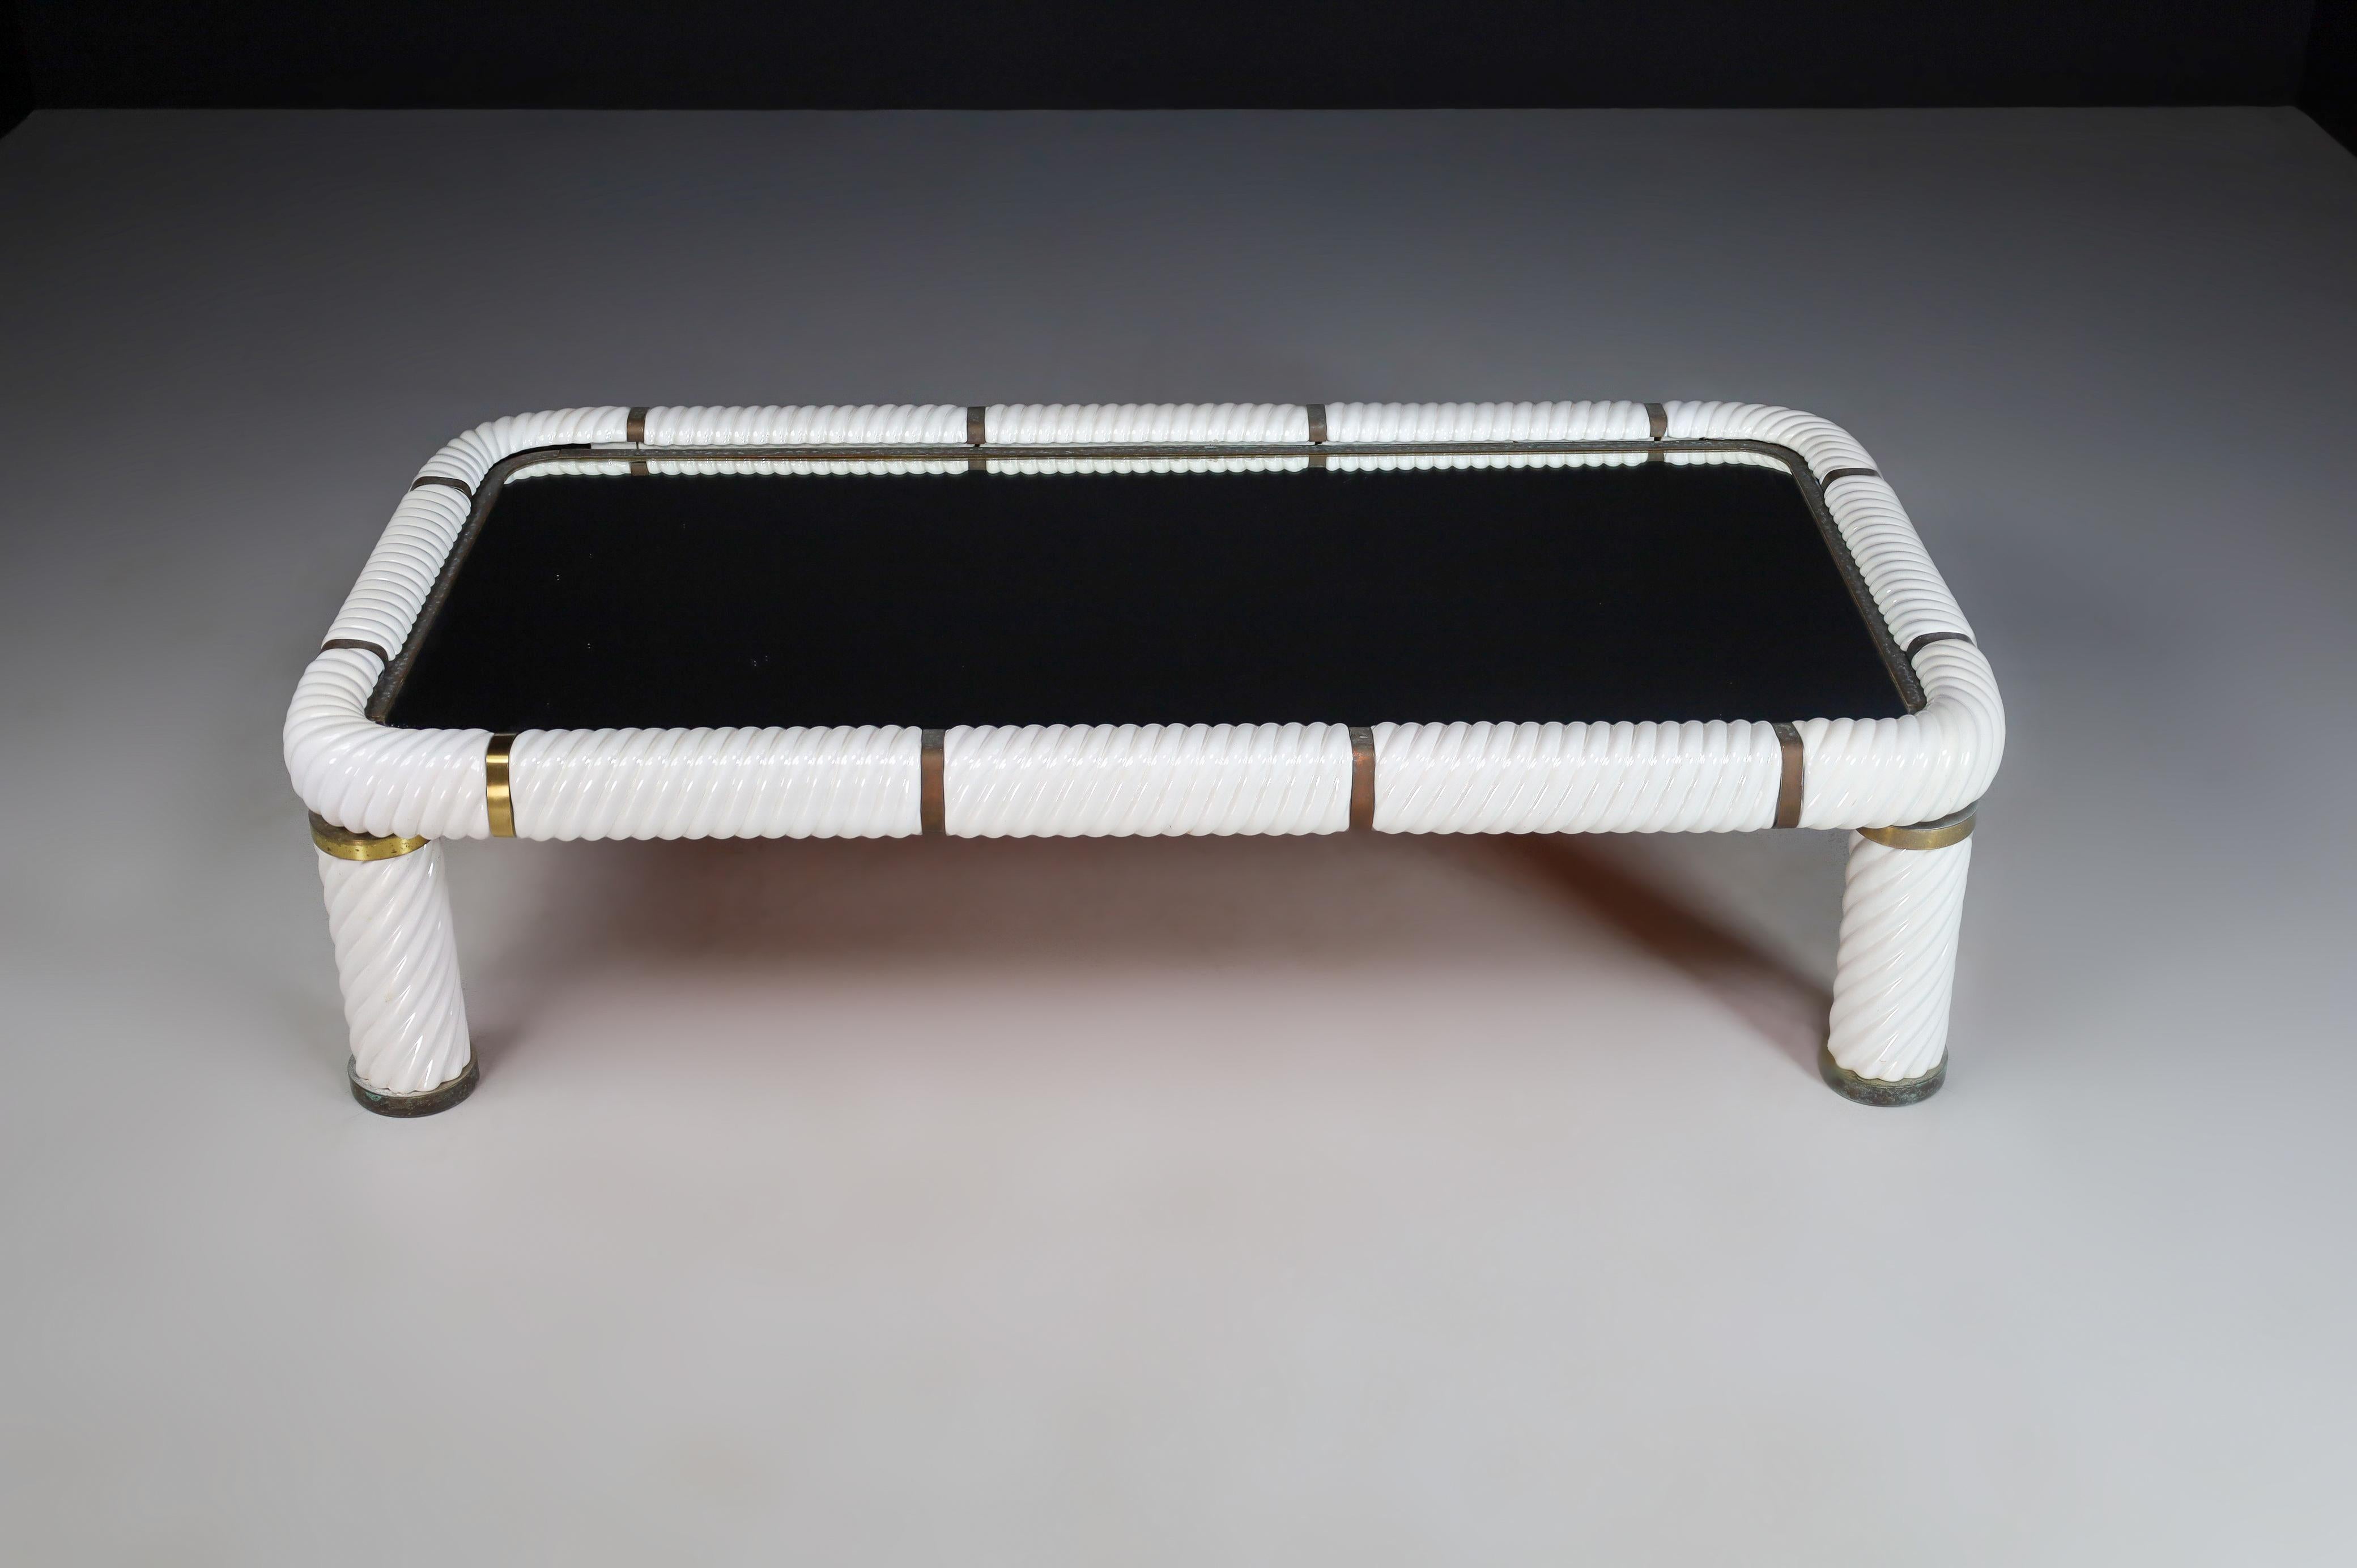 Stunning Tommaso barbi white ceramic and brass coffee table made and designed in Italy 1970s .This table features one of Barbi's signature techniques, which is porcelain in a spiral form to give this table it's absolute stunning appearance. This